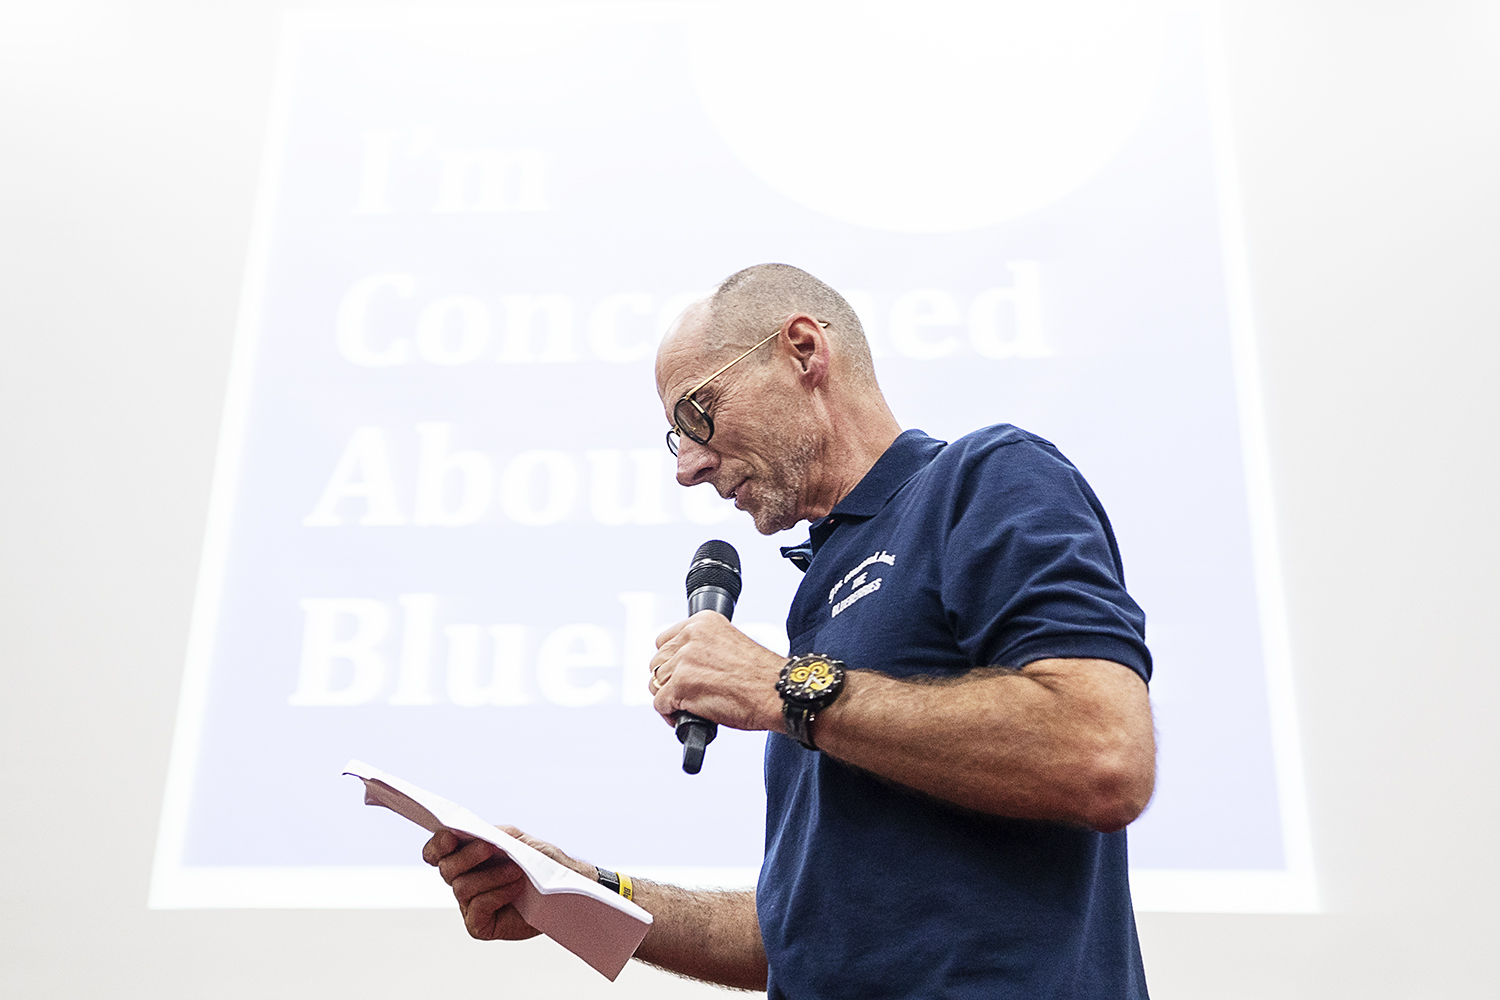 Flint, MI - Friday, May 4, 2018: Blueberry Founder and Fenton Twp. resident Phil Shaltz, 69, speaks to the audience about the beginning of the Blueberry Ambassador program during the 5th Annual Blueberry Ambassador Awards Party at the Riverfront Banq